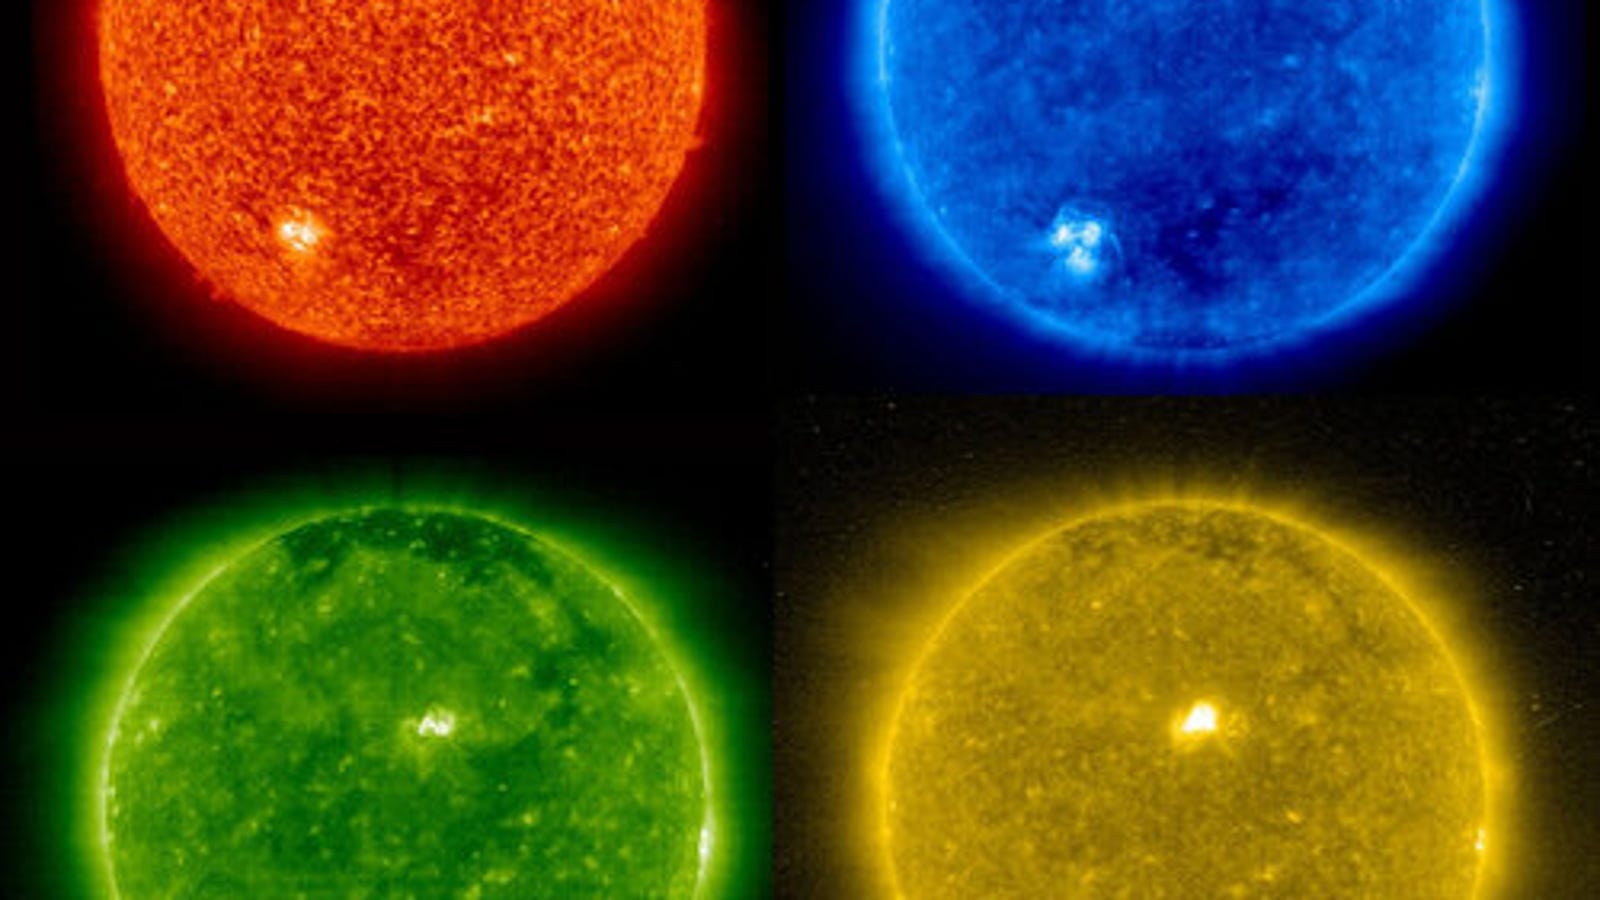 welcome-back-sunspots-with-the-many-colors-of-solar-pop-art